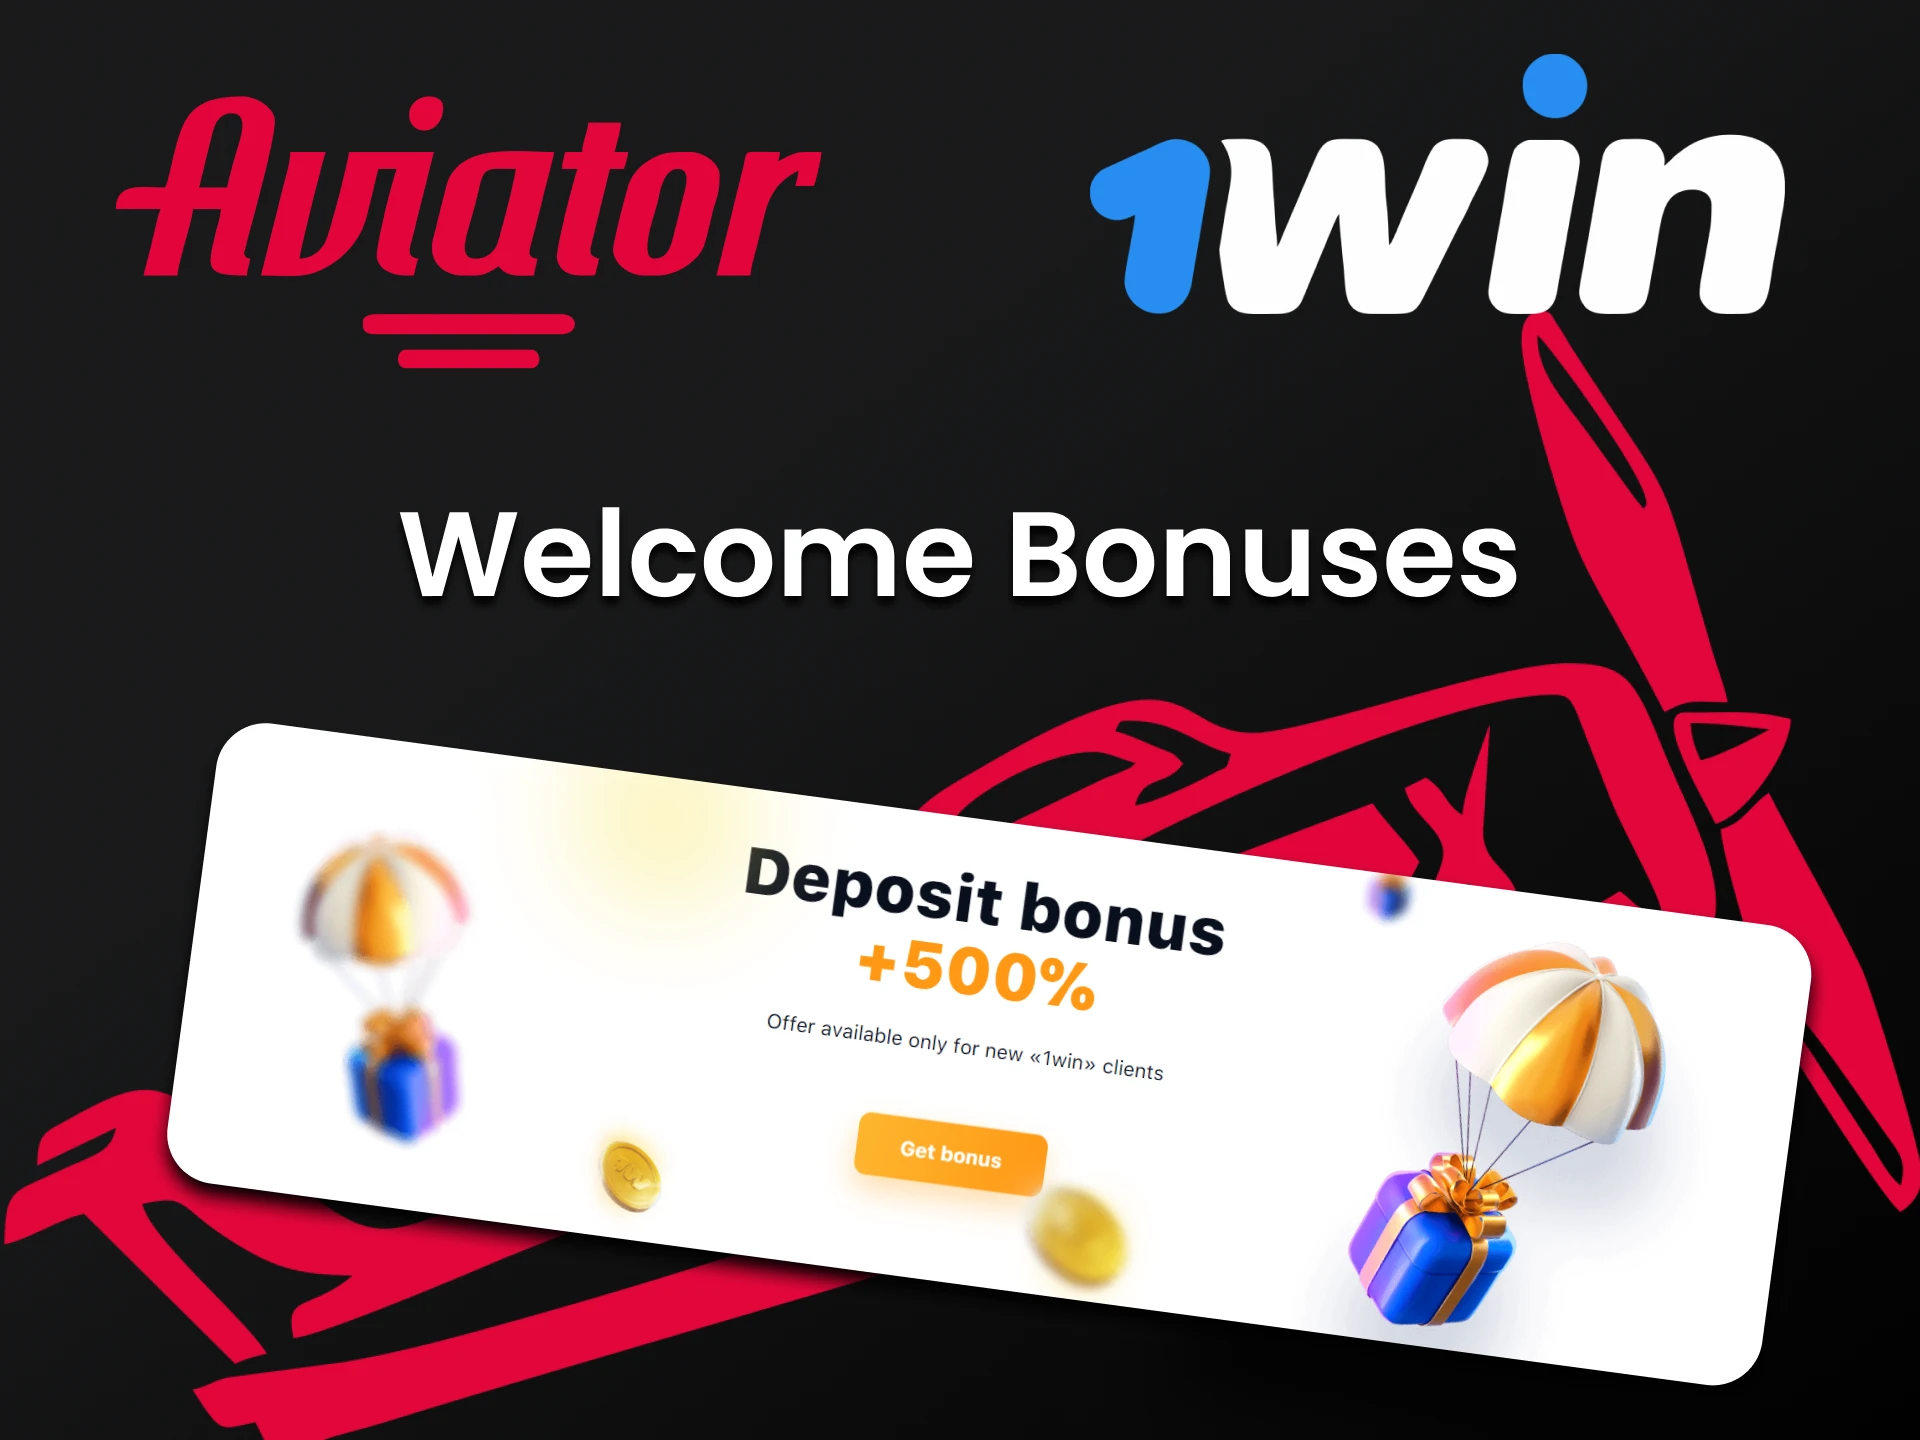 Get bonuses from 1win for playing Aviator.